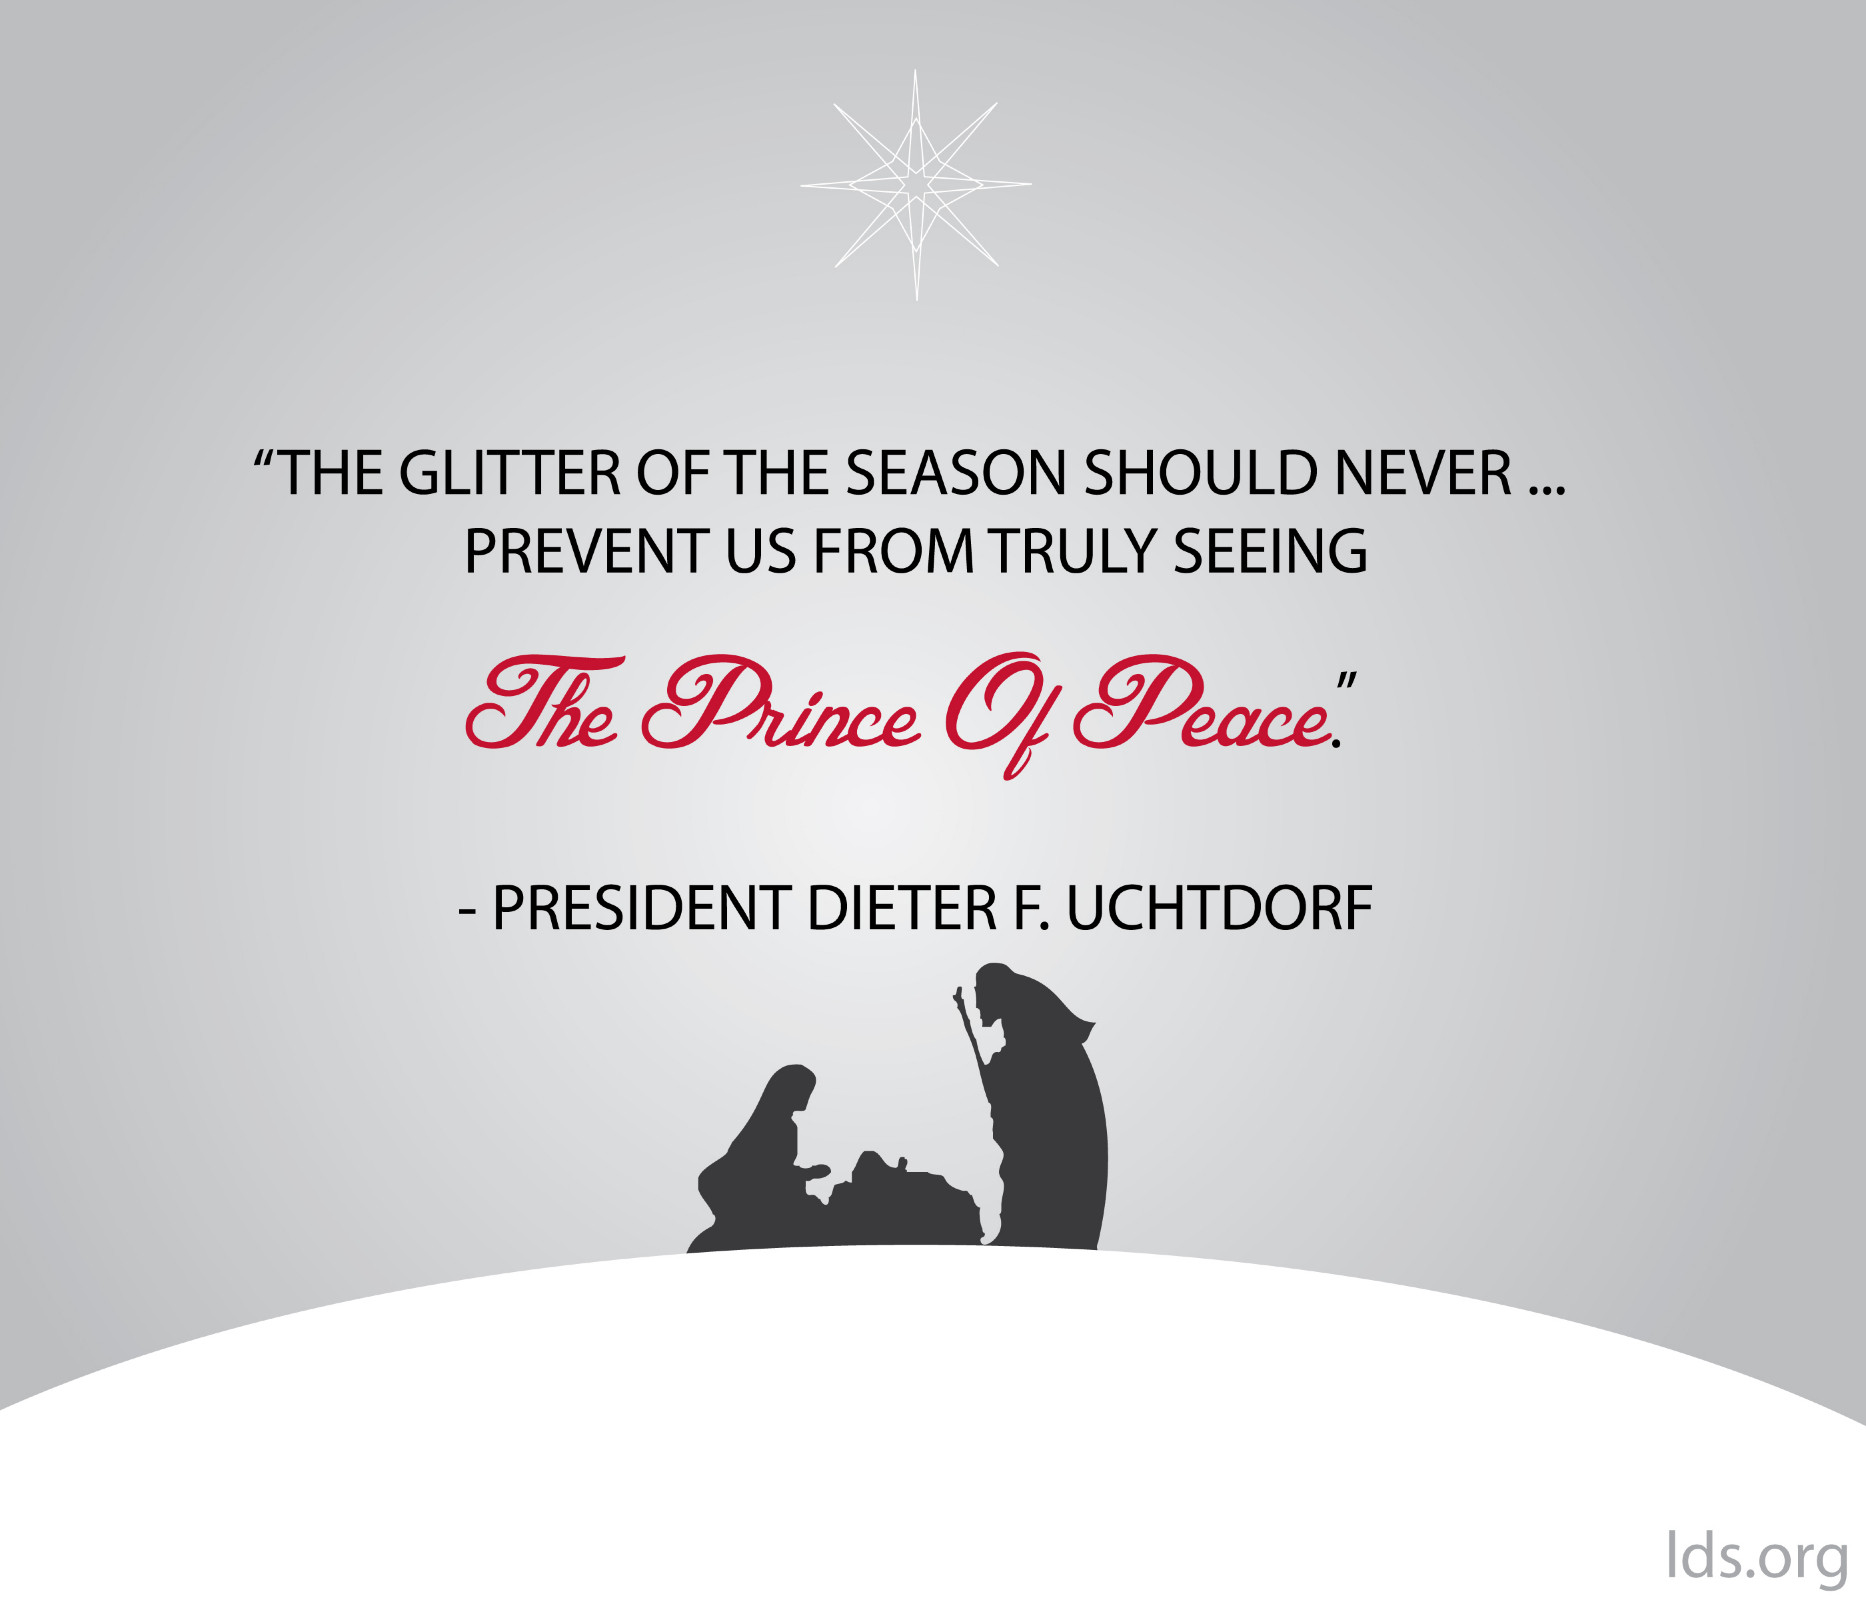 Lds Christmas Quotes
 Seeing the Prince of Peace